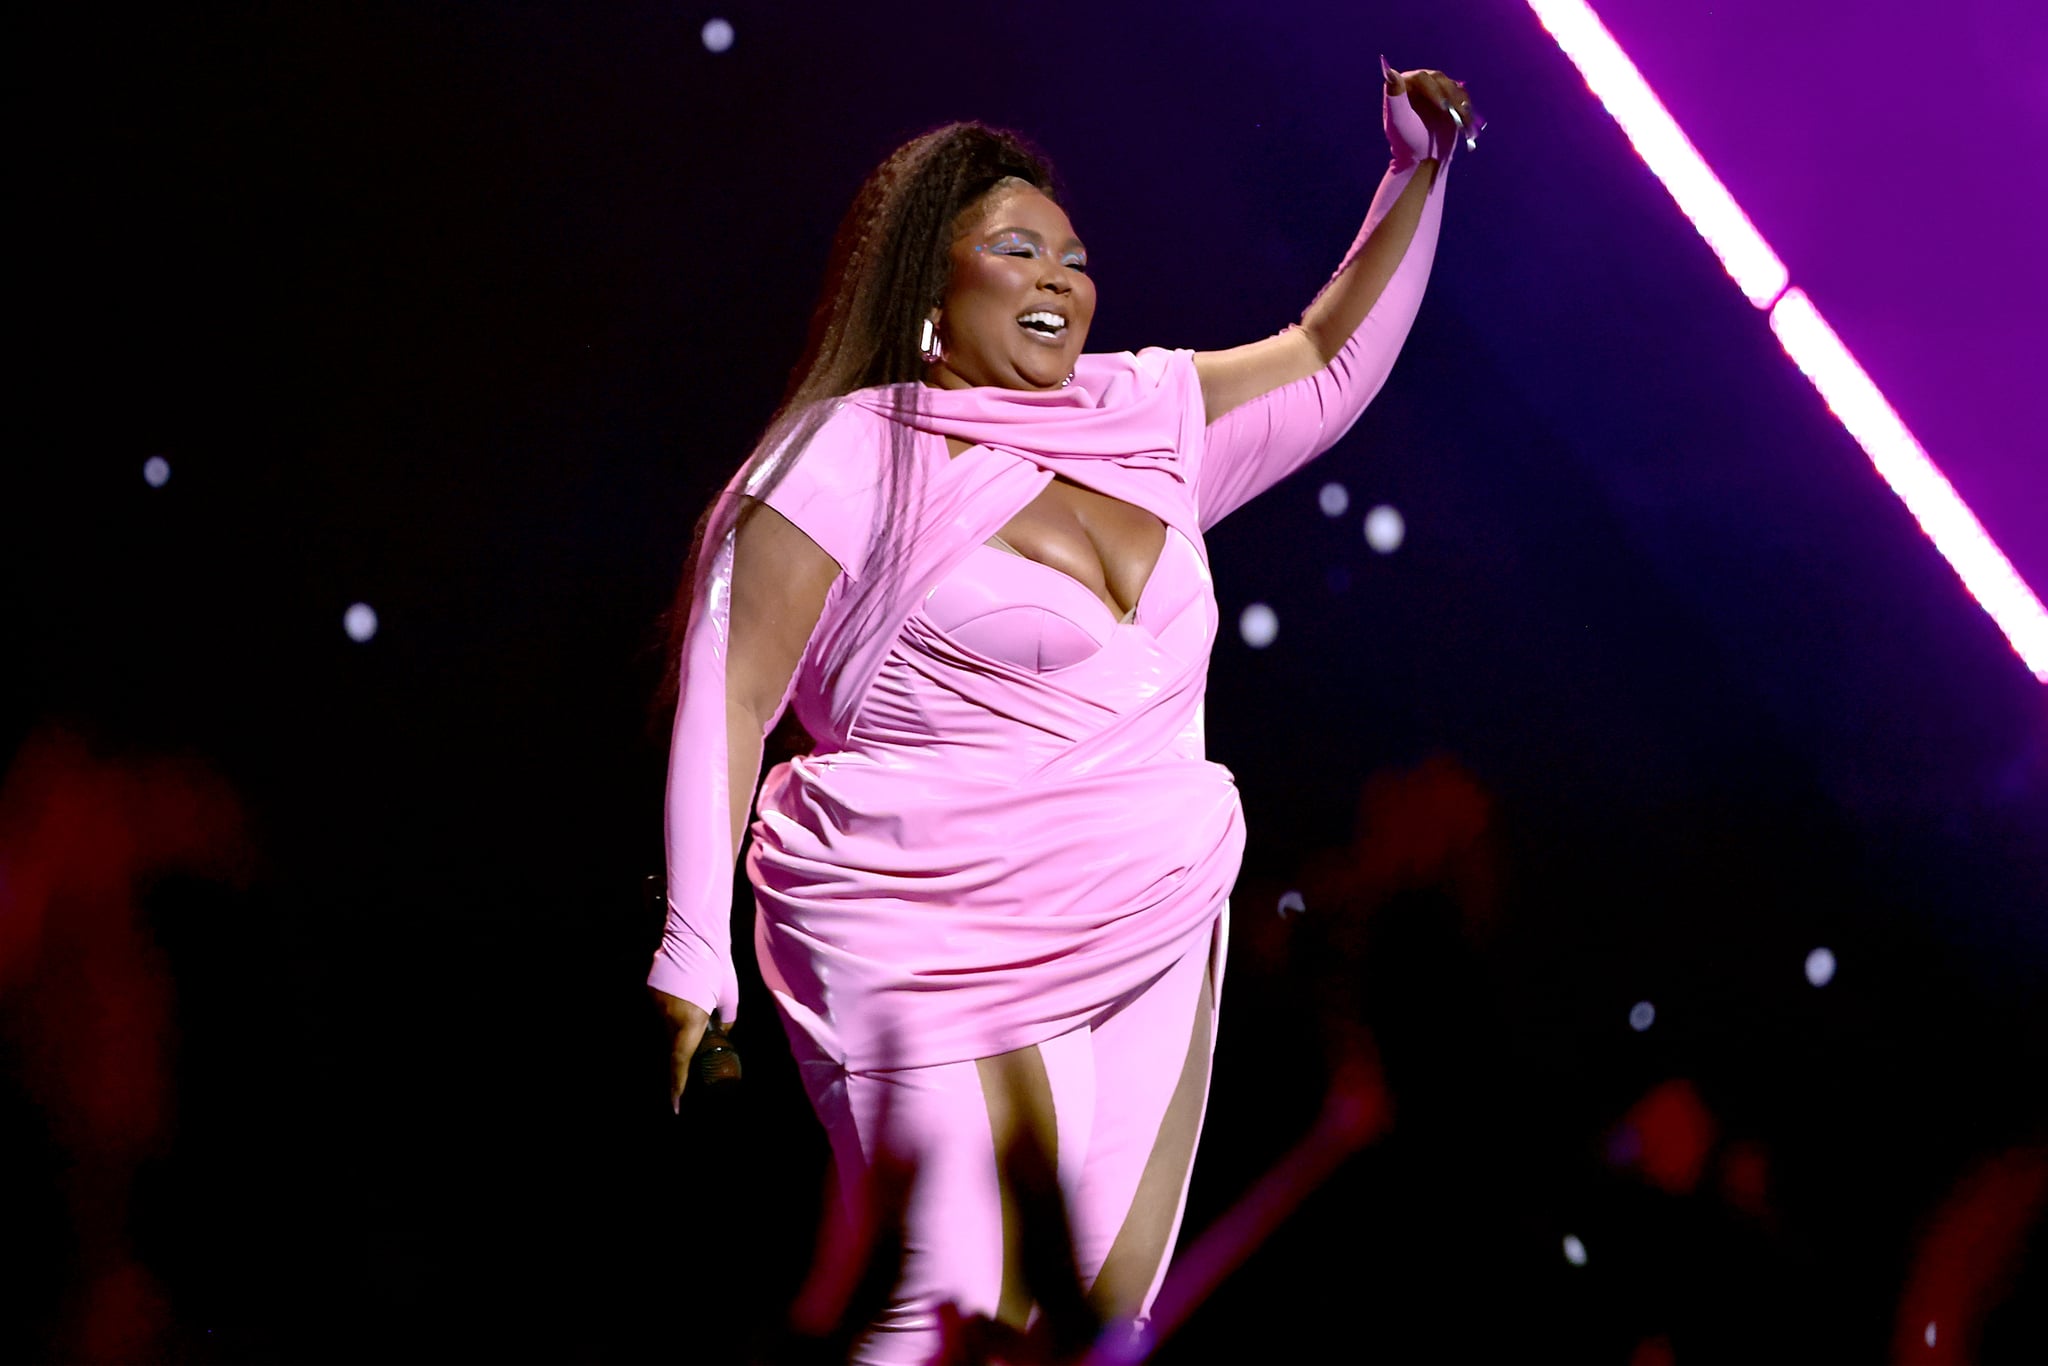 NEWARK, NEW JERSEY - AUGUST 28: Lizzo performs onstage at the 2022 MTV VMAs at Prudential Center on August 28, 2022 in Newark, New Jersey. (Photo by Dimitrios Kambouris/Getty Images for MTV/Paramount Global)